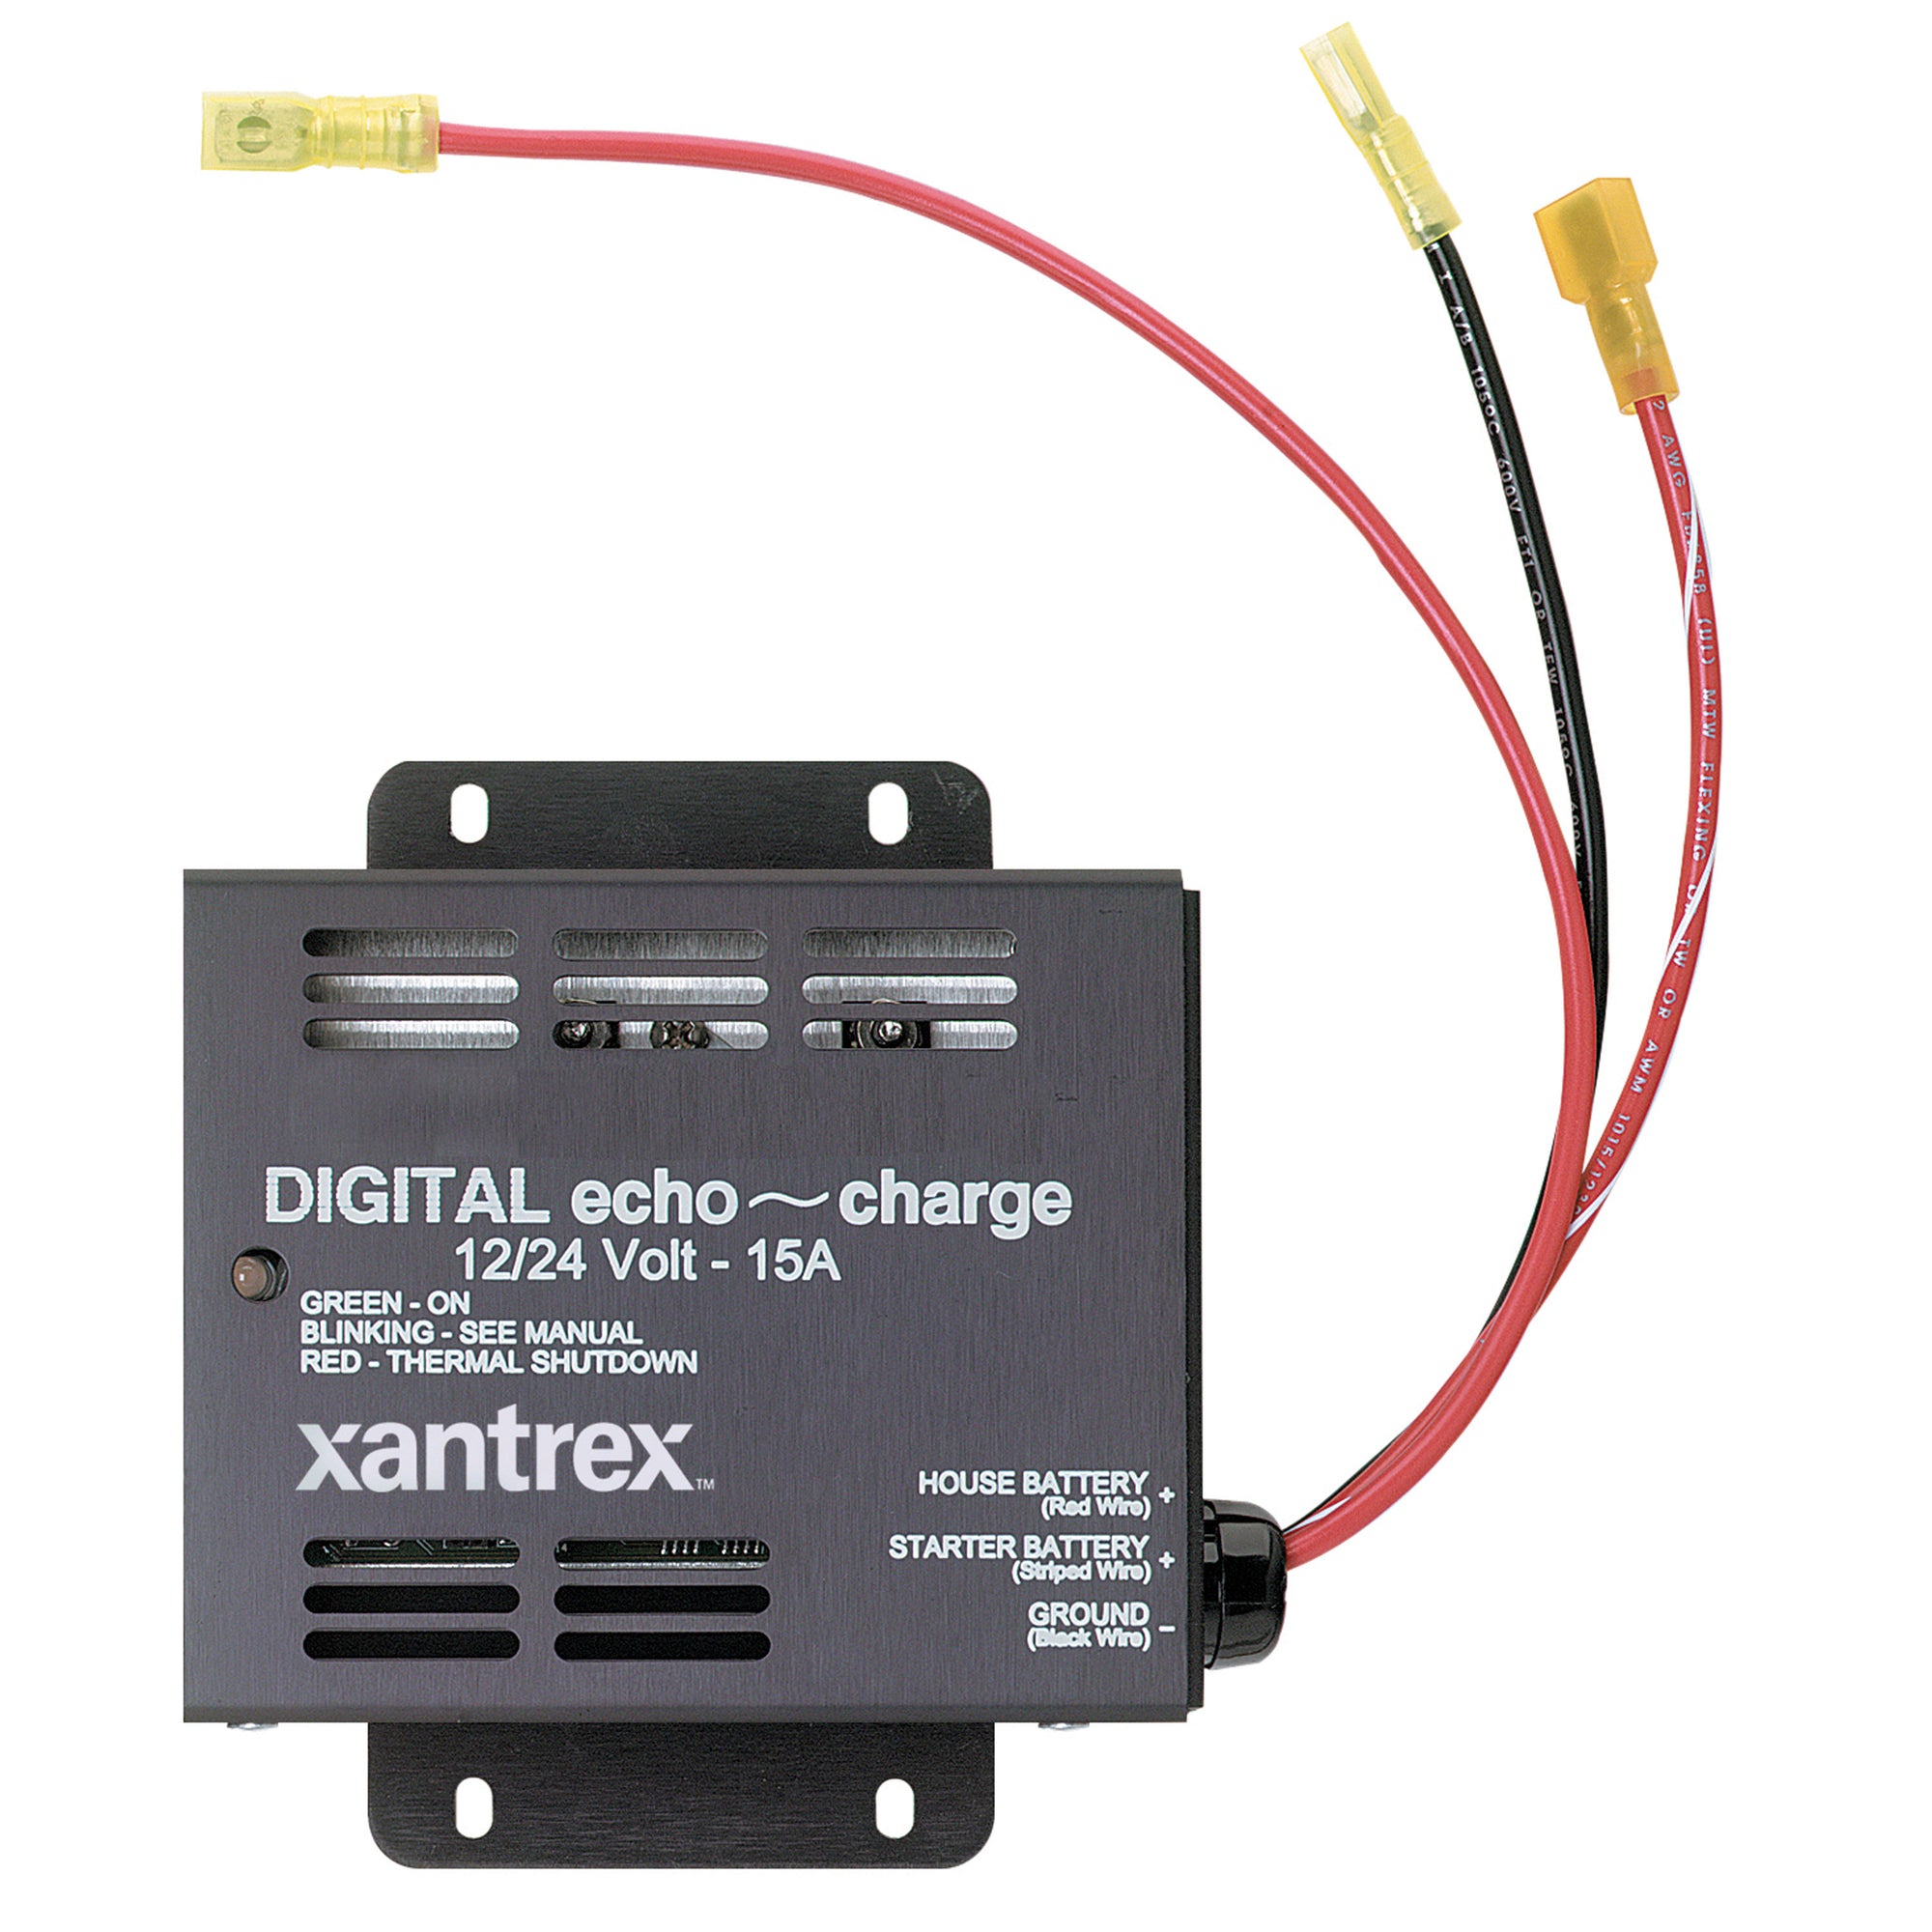 Xantrex 82-0123-01  Echo-Charge Digital Auxiliary Battery Charger - 15 Amp